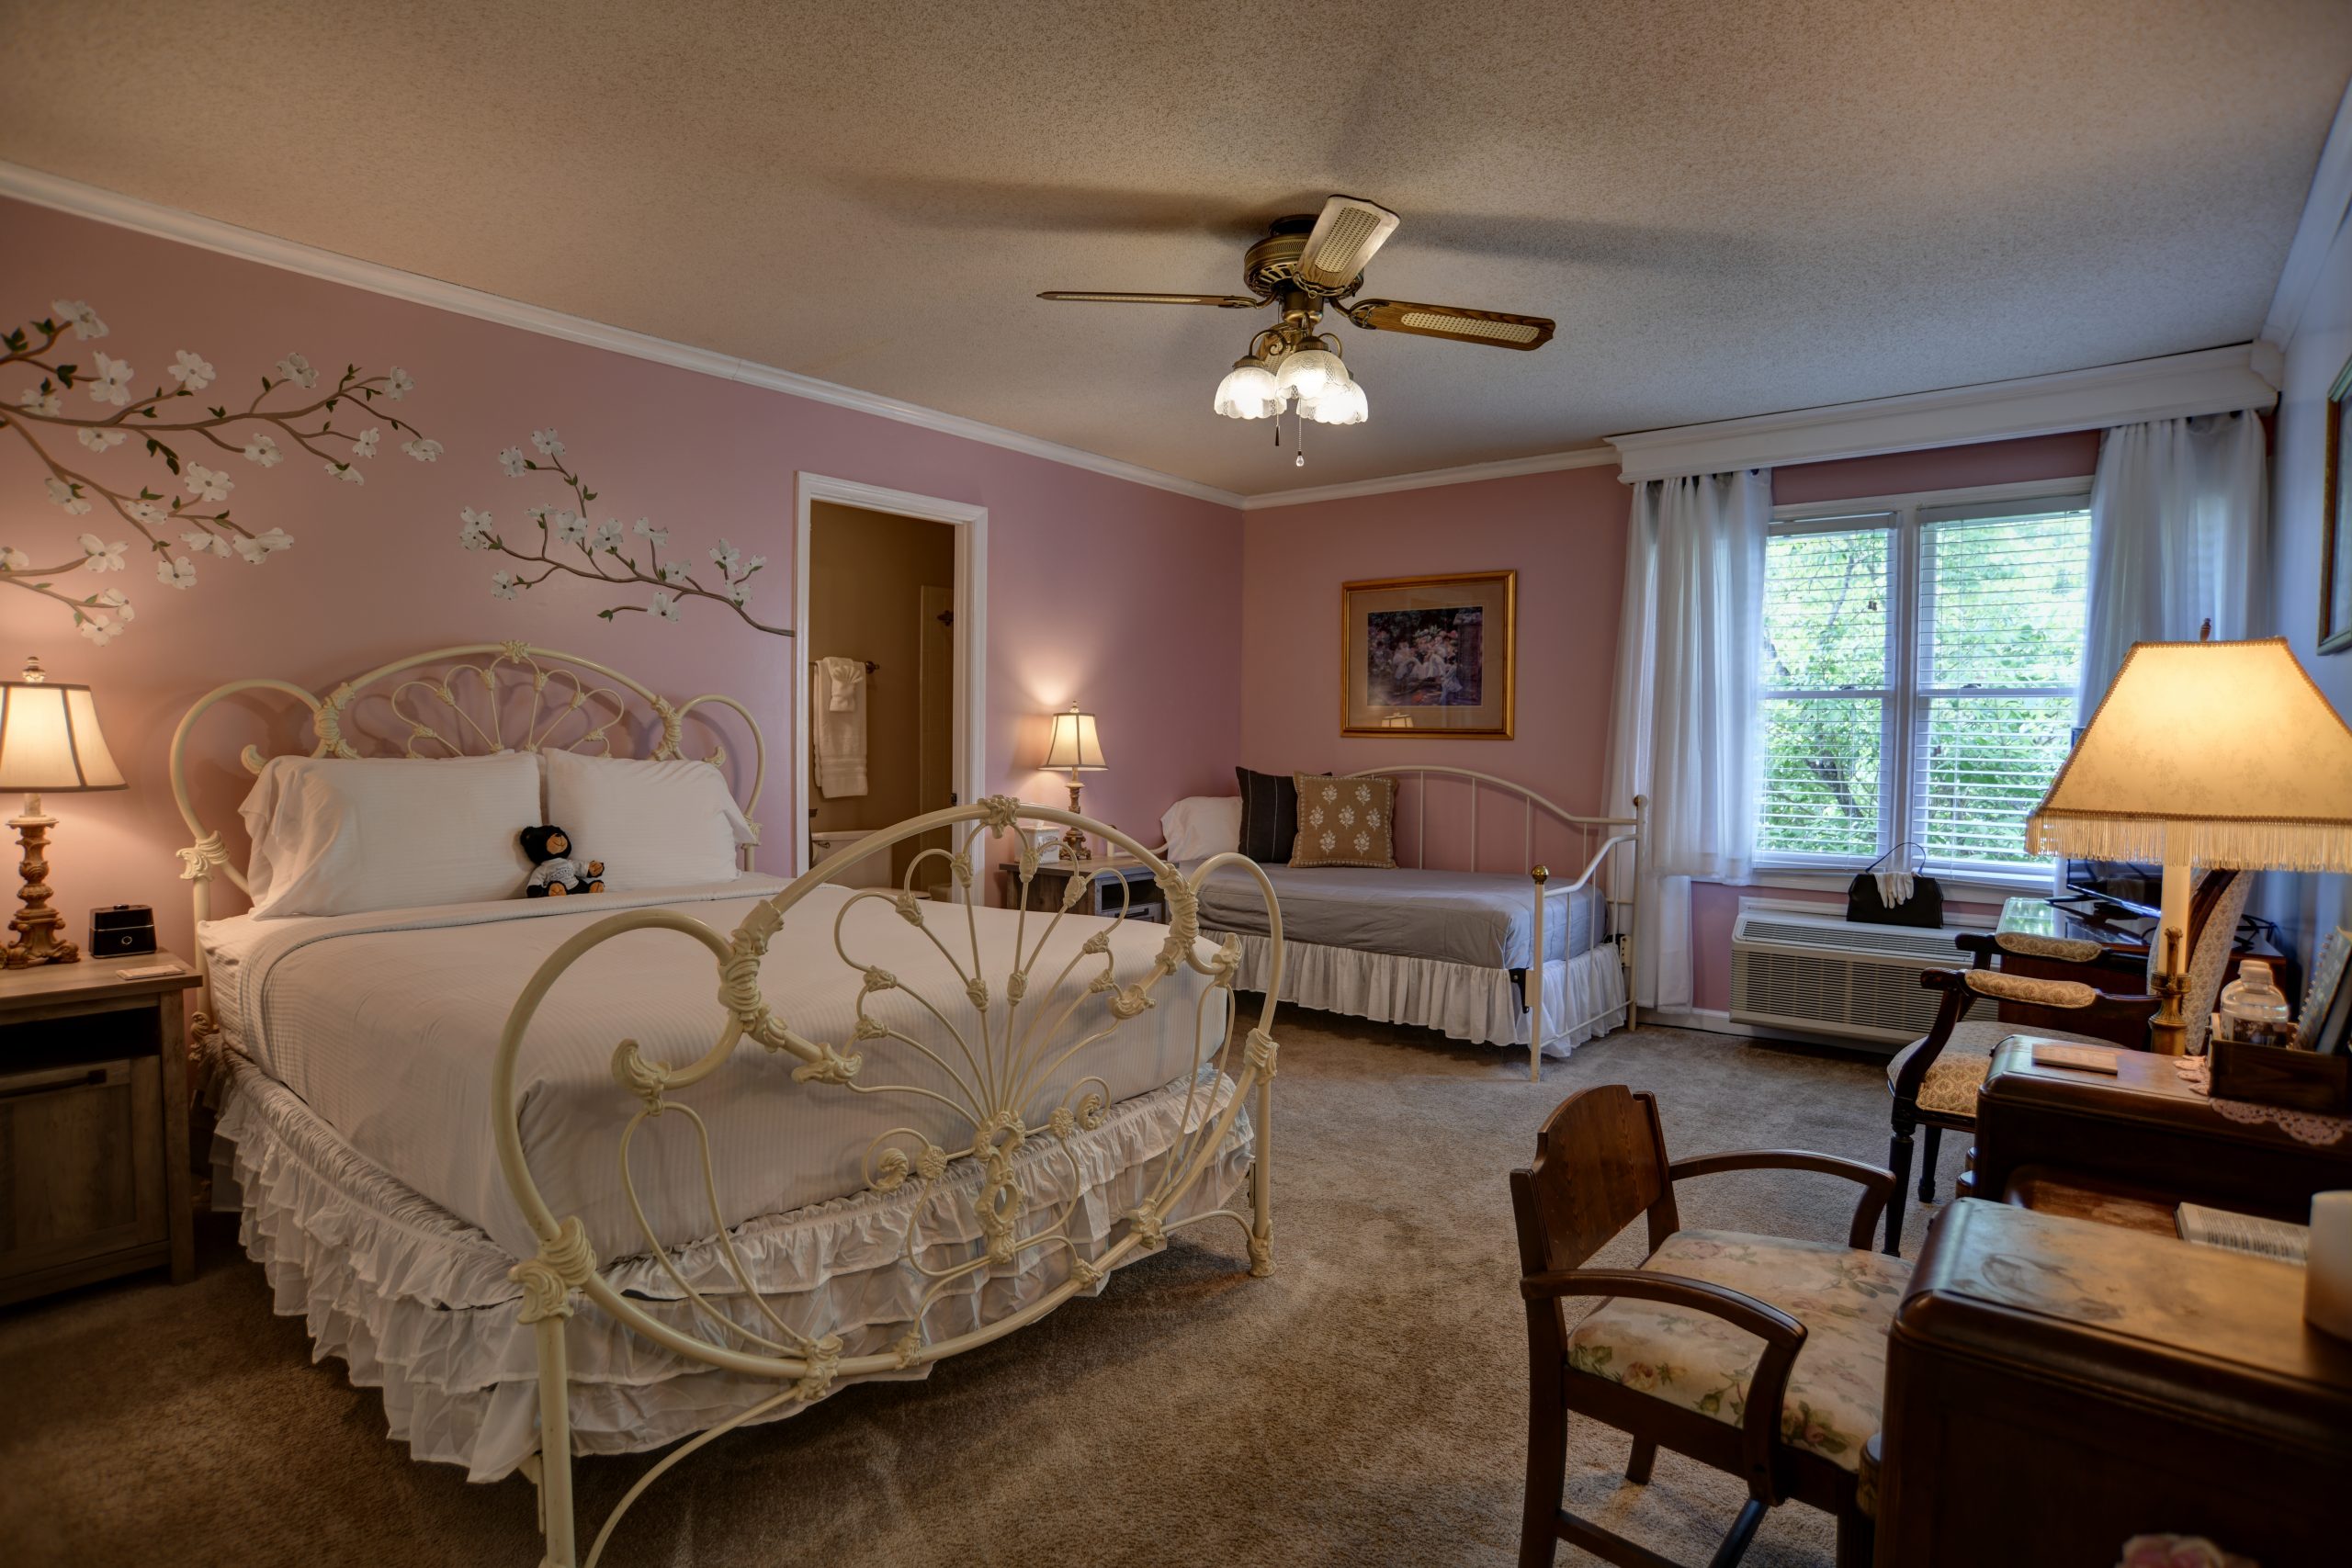 Ramsey Cascades room on the second floor. Pink and white room with elegant undertones and gray accents. A queen-sized bed and a twin.